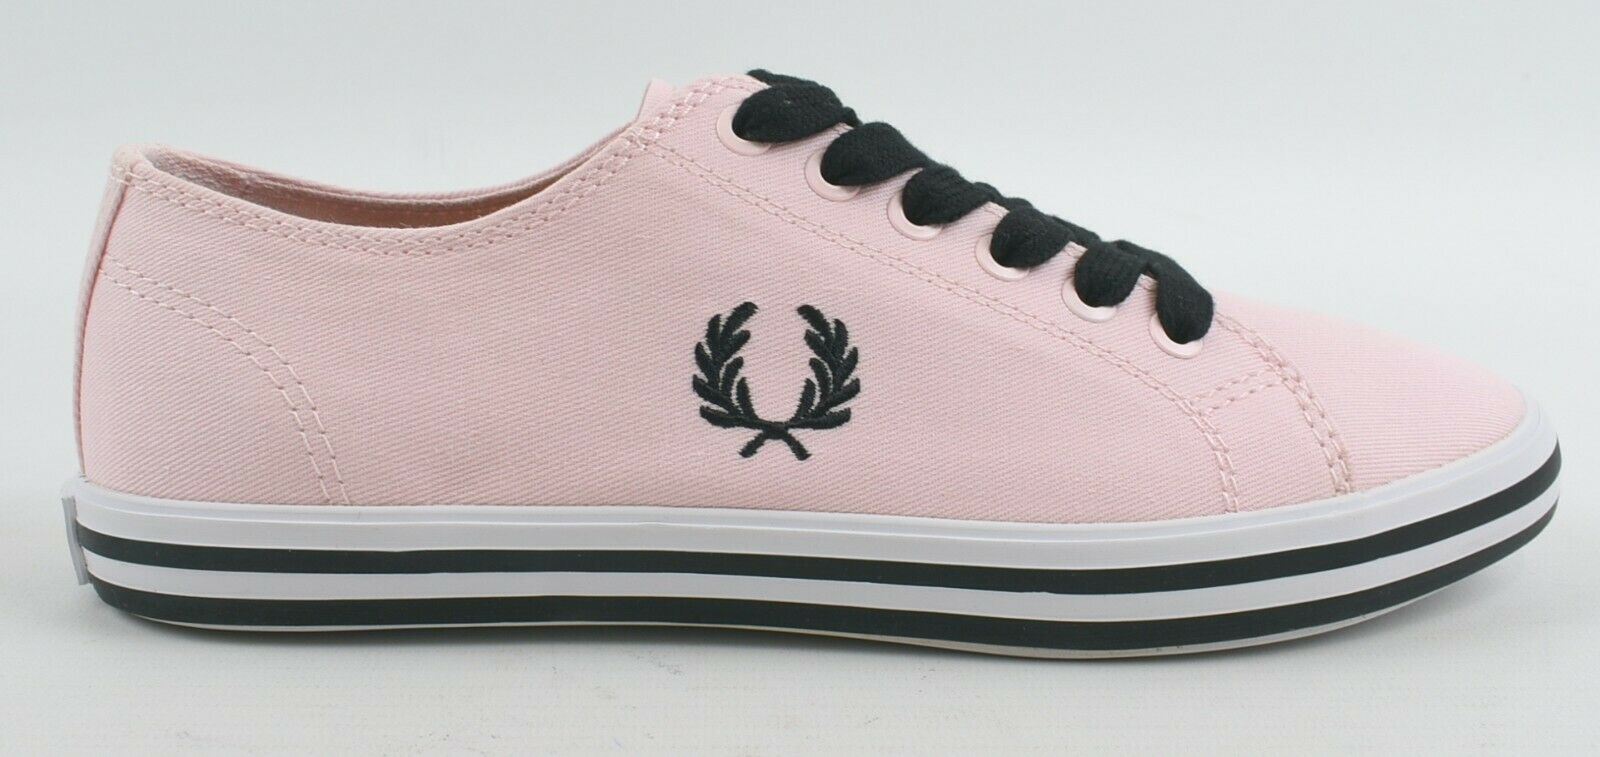 FRED PERRY Women's KINGSTON TWILL Trainers, Iced Pink, size UK 4 /EU 37